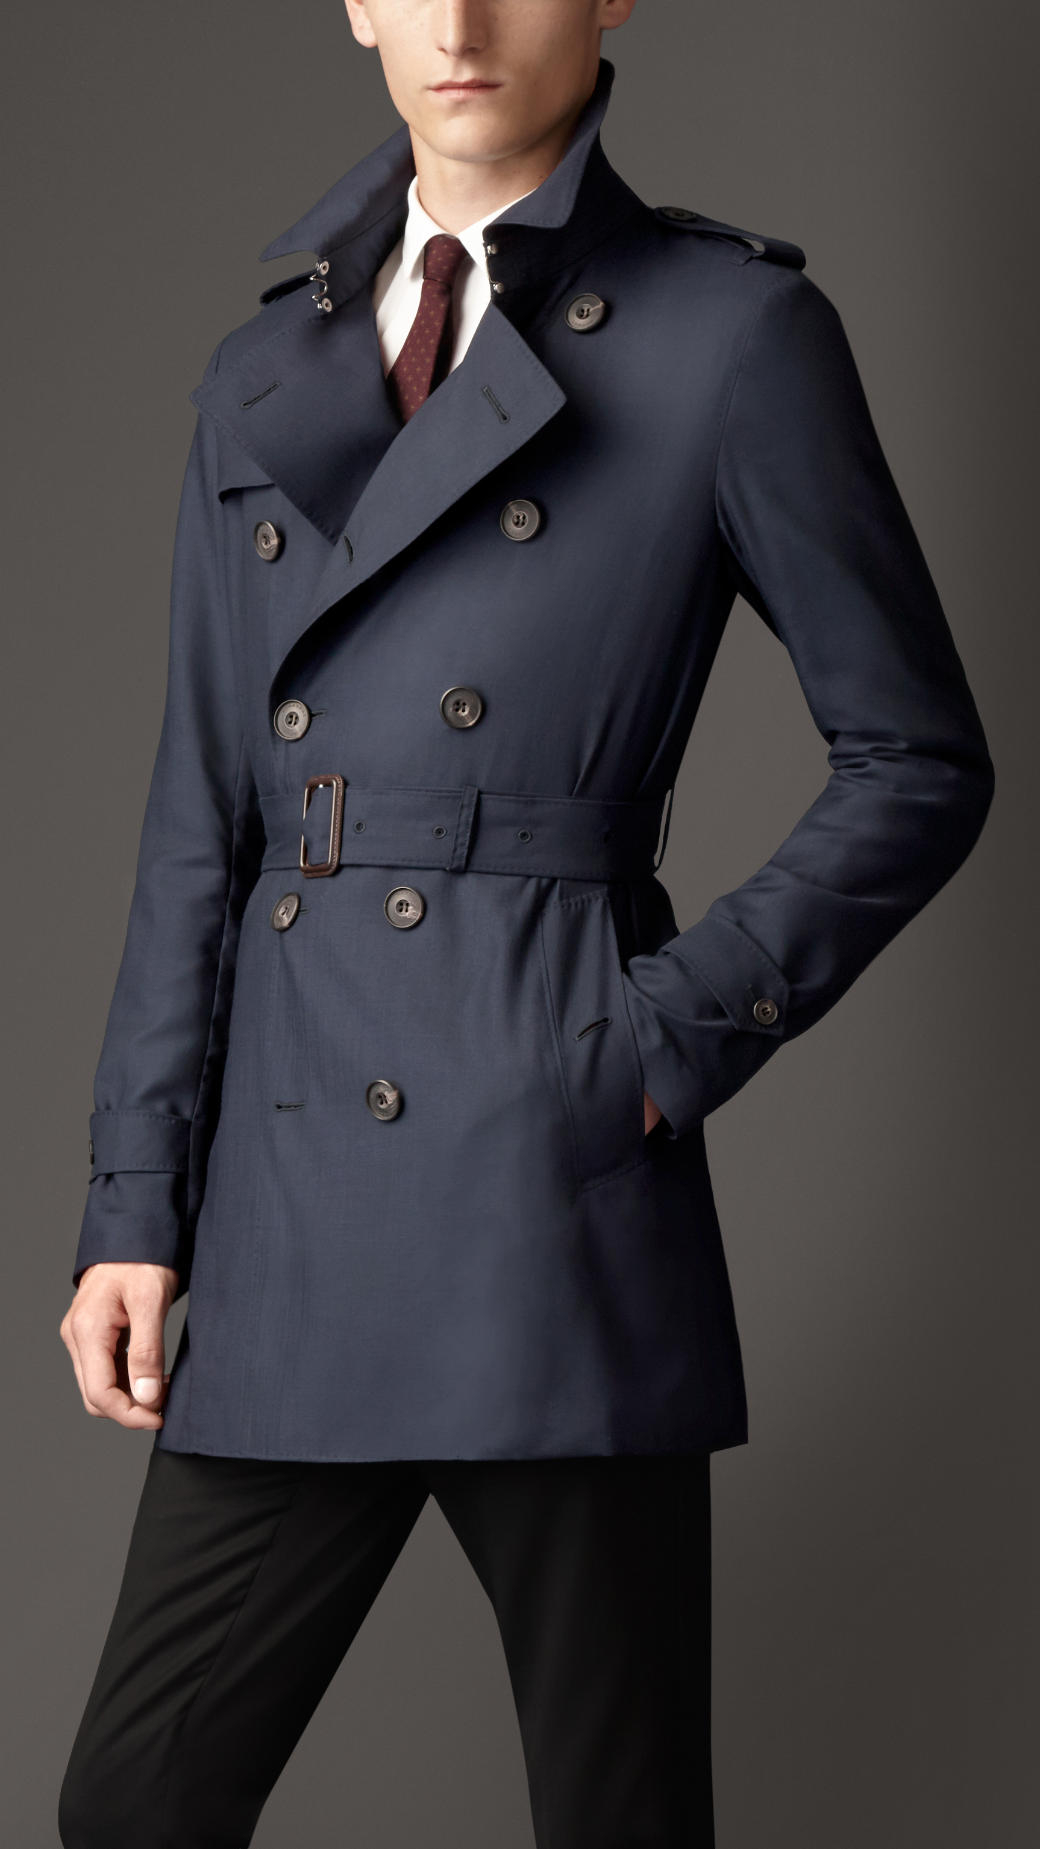 Lyst - Burberry Mid Length Light Weight Cashmere Trench Coat in Blue